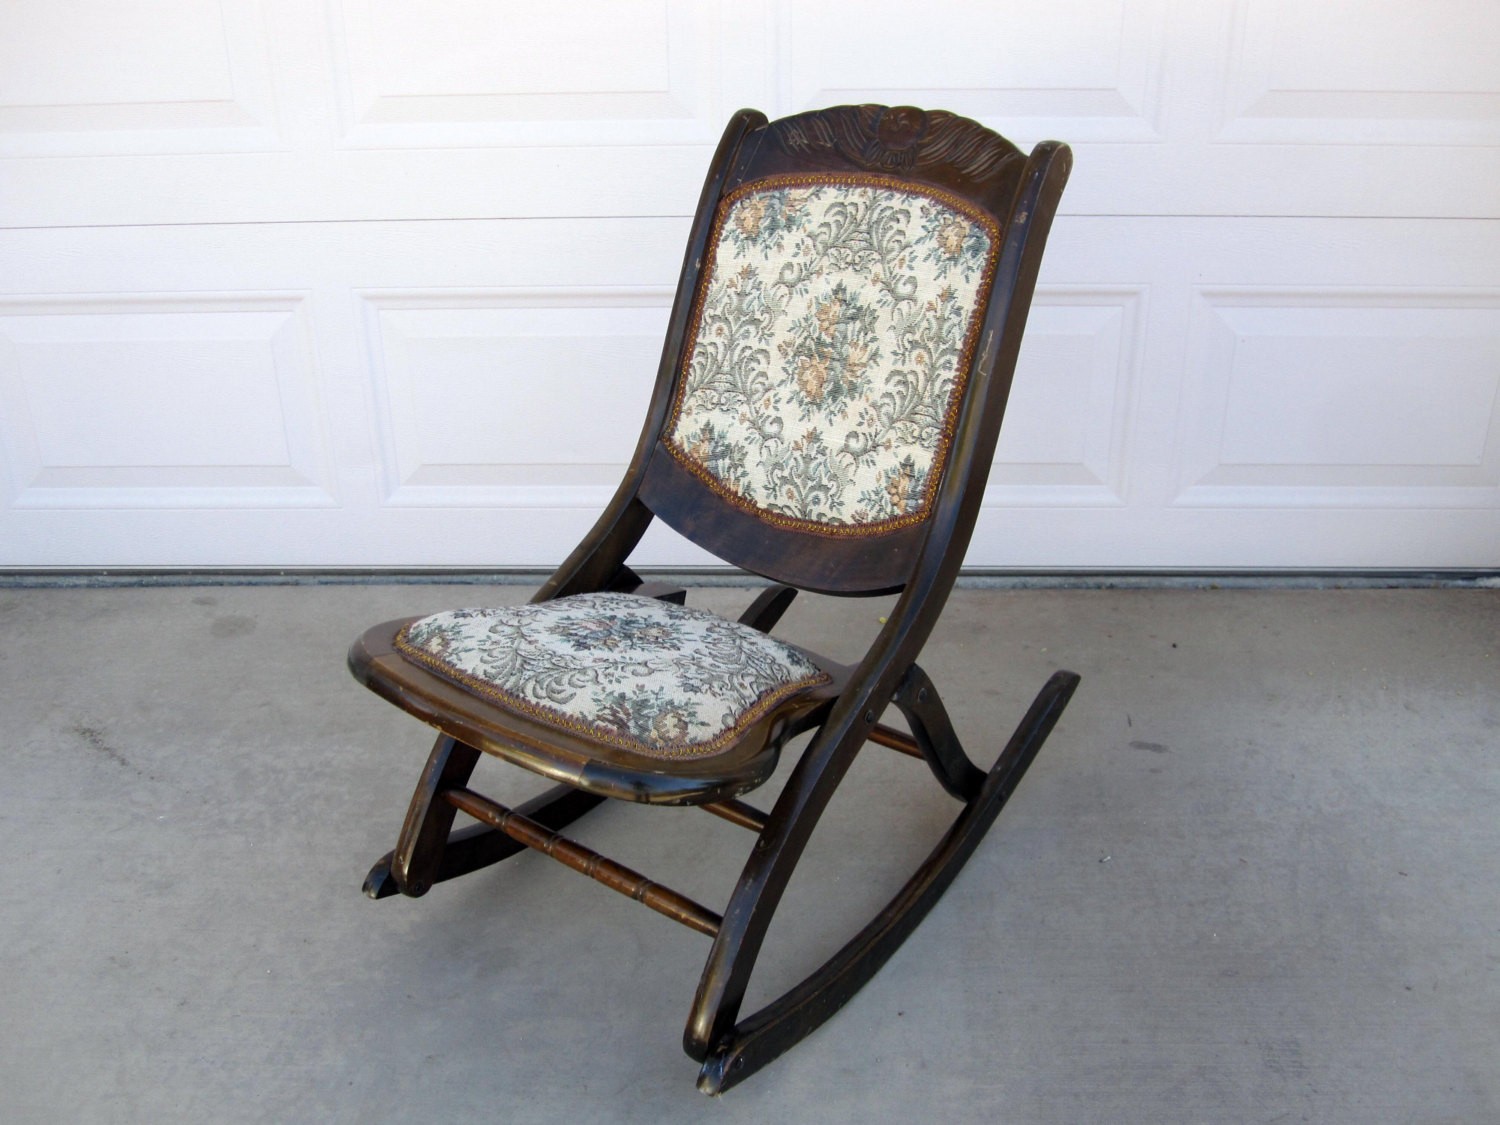 Antique mahogany folding rocking chair with floral patterned seat and